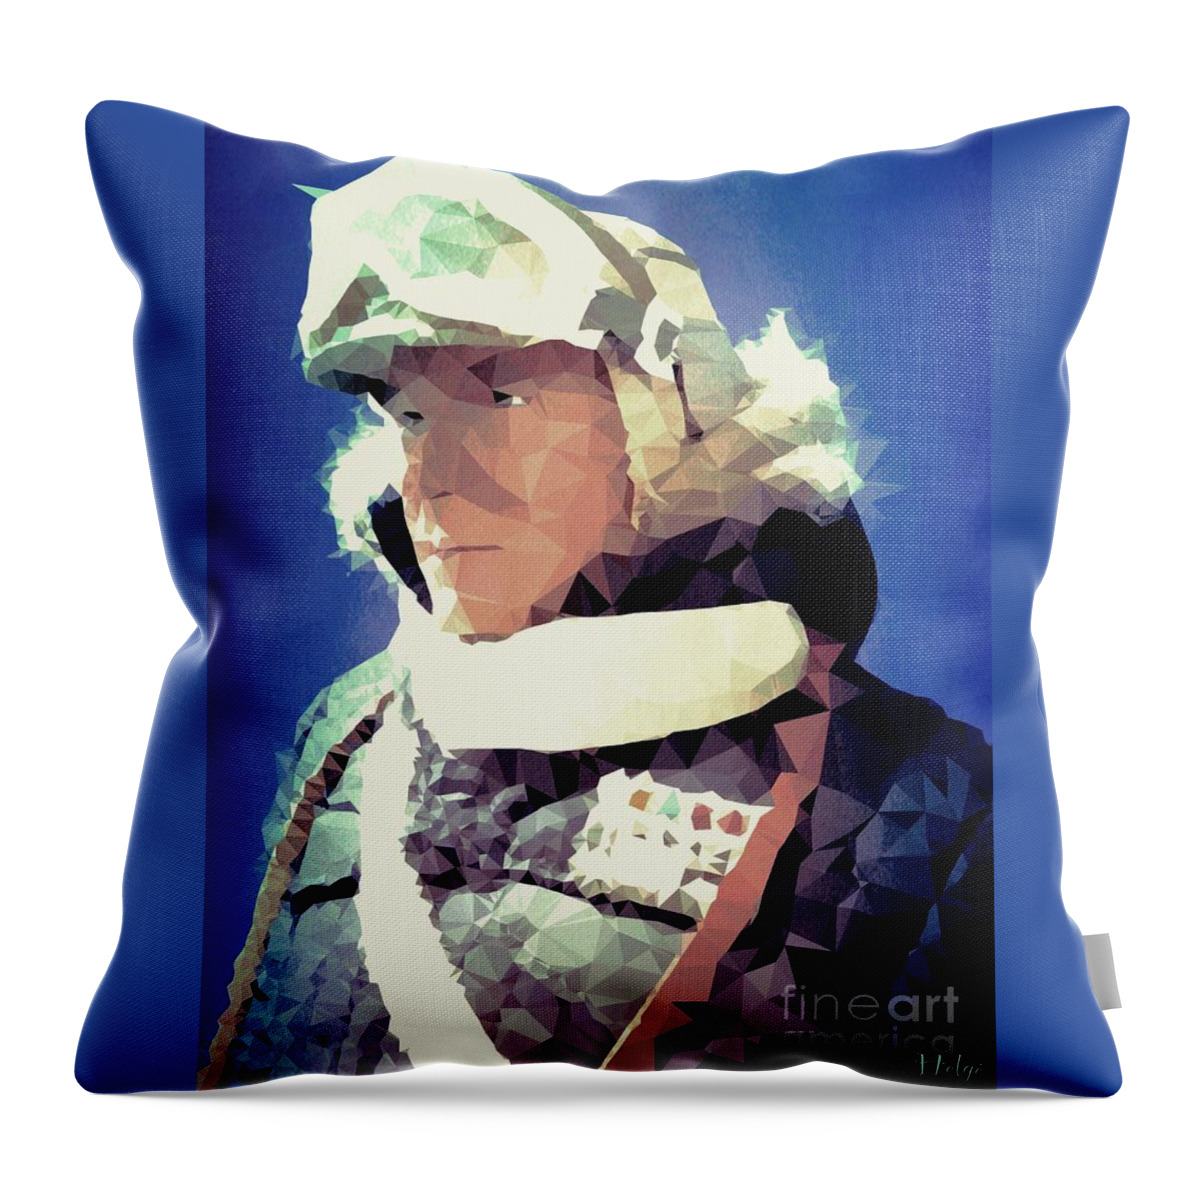 Han Solo Throw Pillow featuring the digital art Han by HELGE Art Gallery